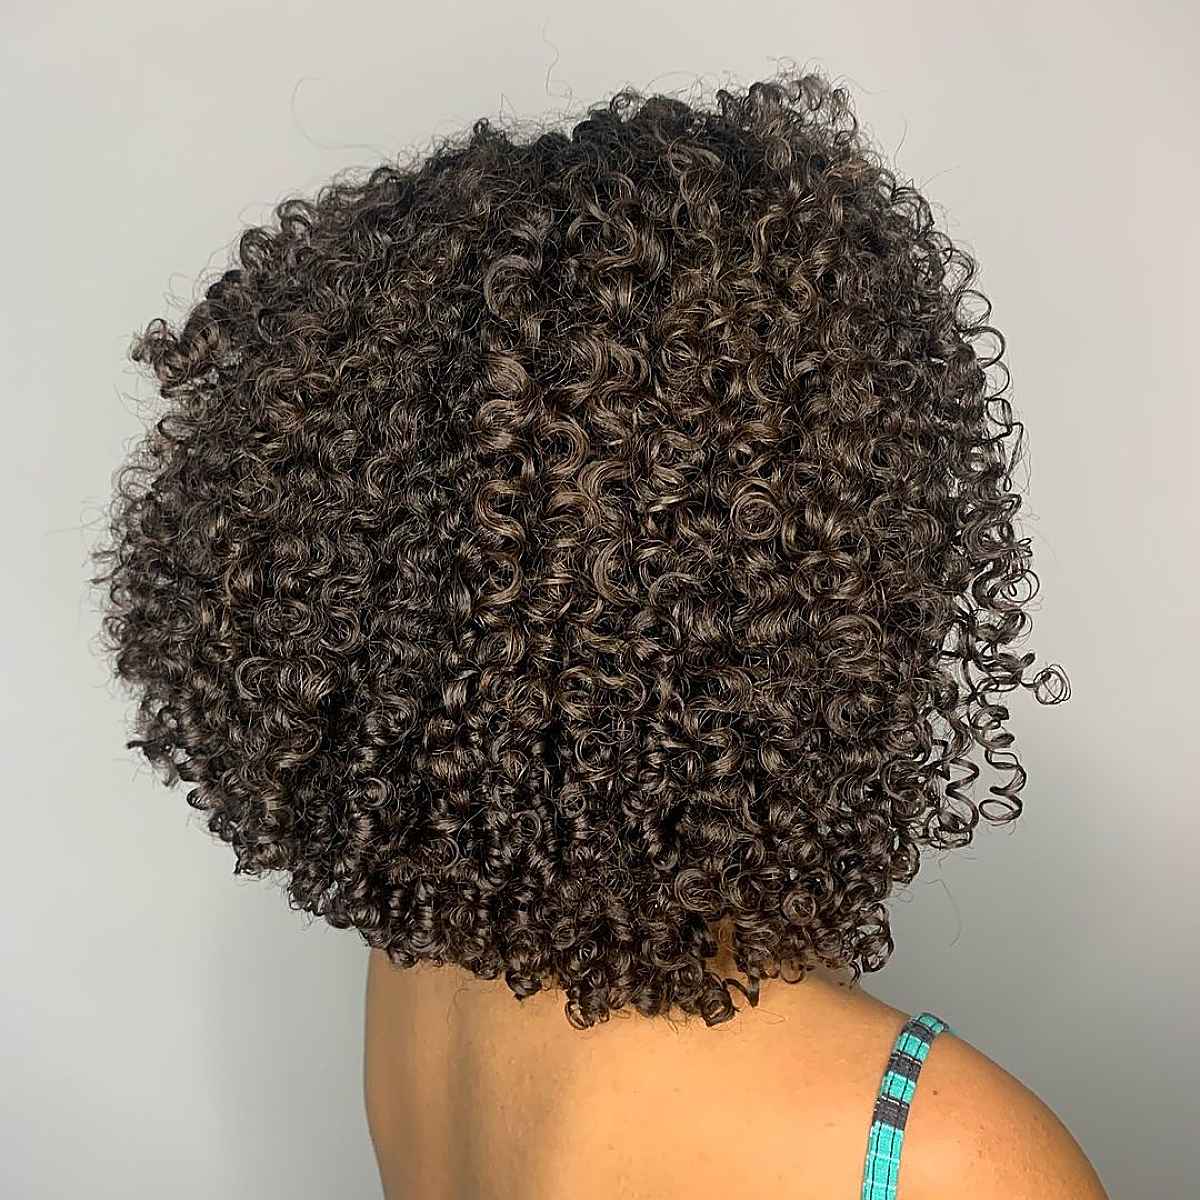 Low-Maintenance Stacked Lob with Natural Curls